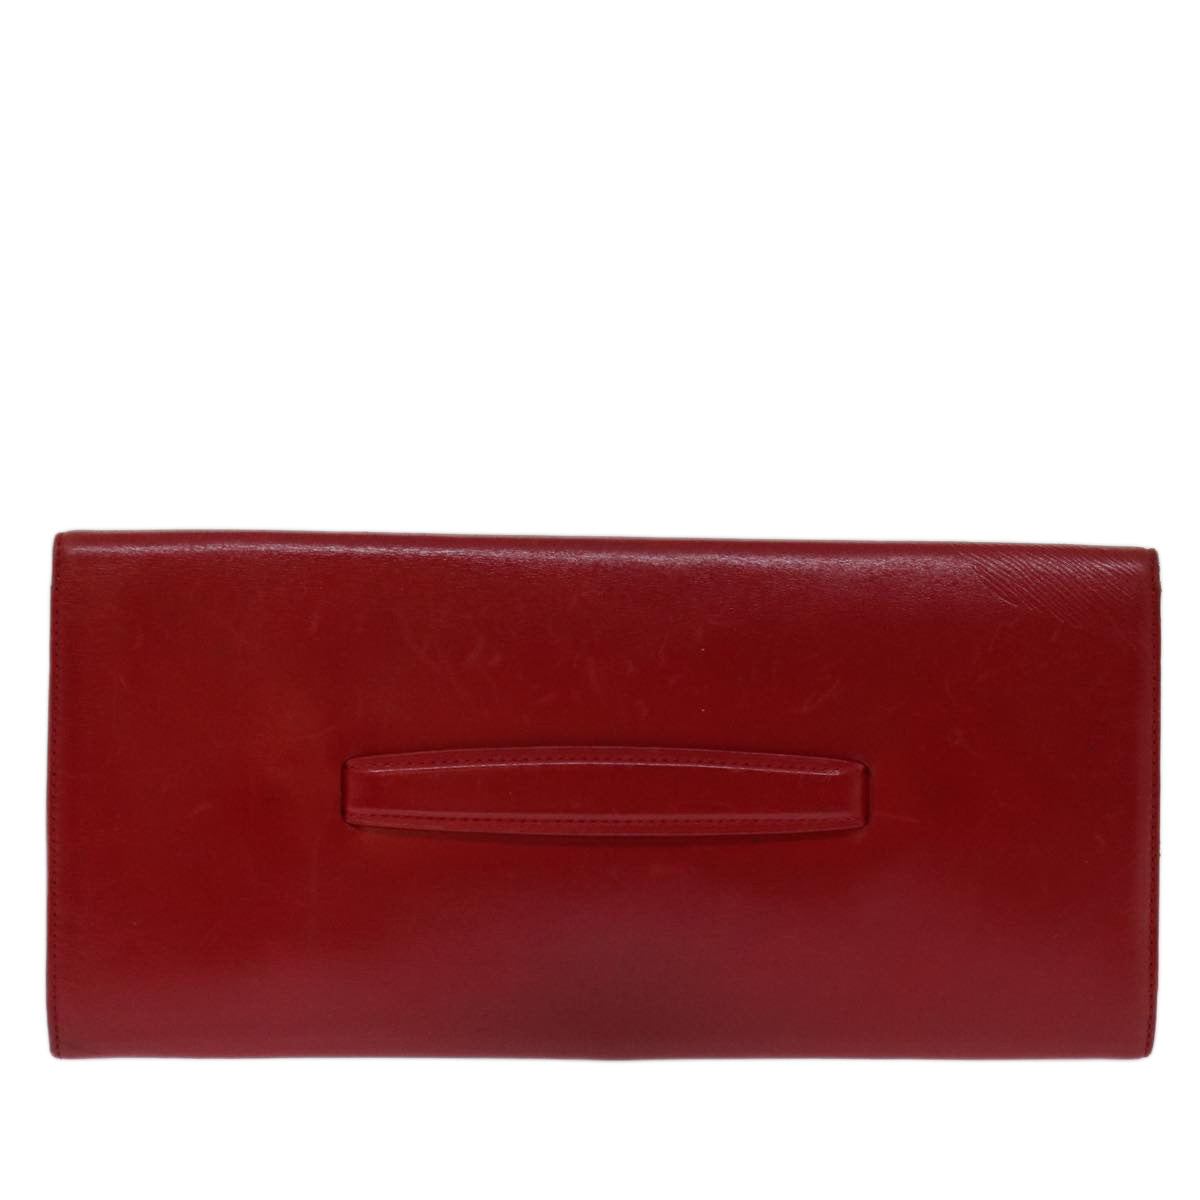 LOUIS VUITTON Mycenae Clutch Bag Leather Red M63957 LV Auth bs13222 - 0